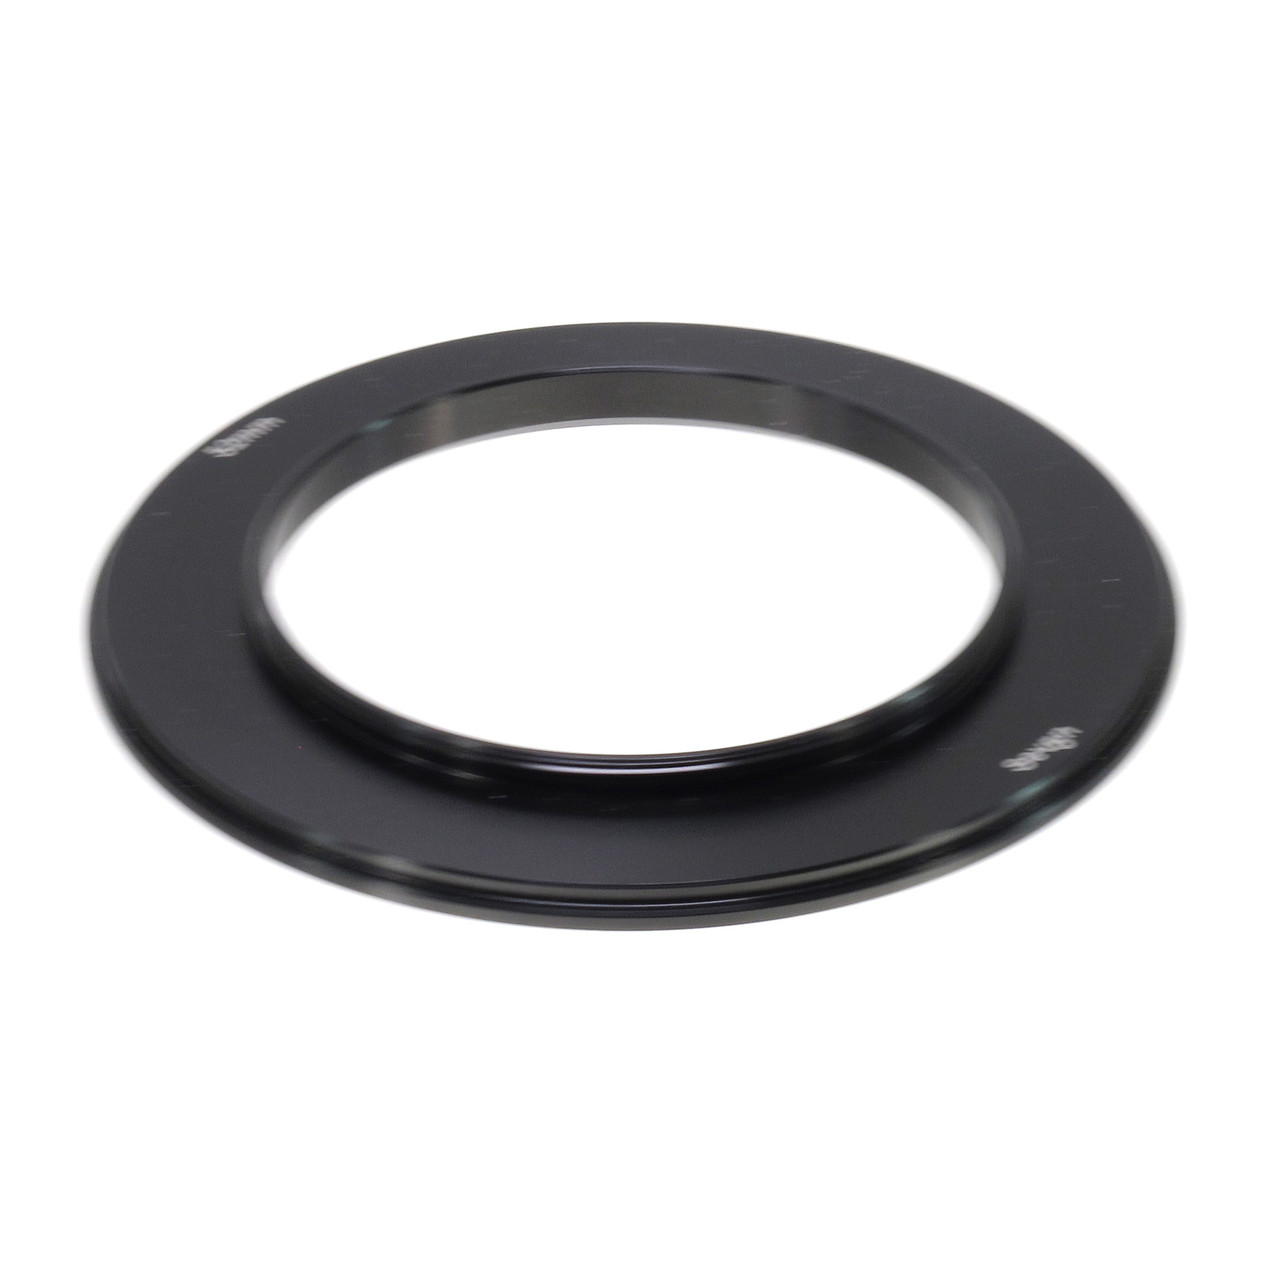 USED LEE FILTERS SEVEN5 52MM ADAPTER RING